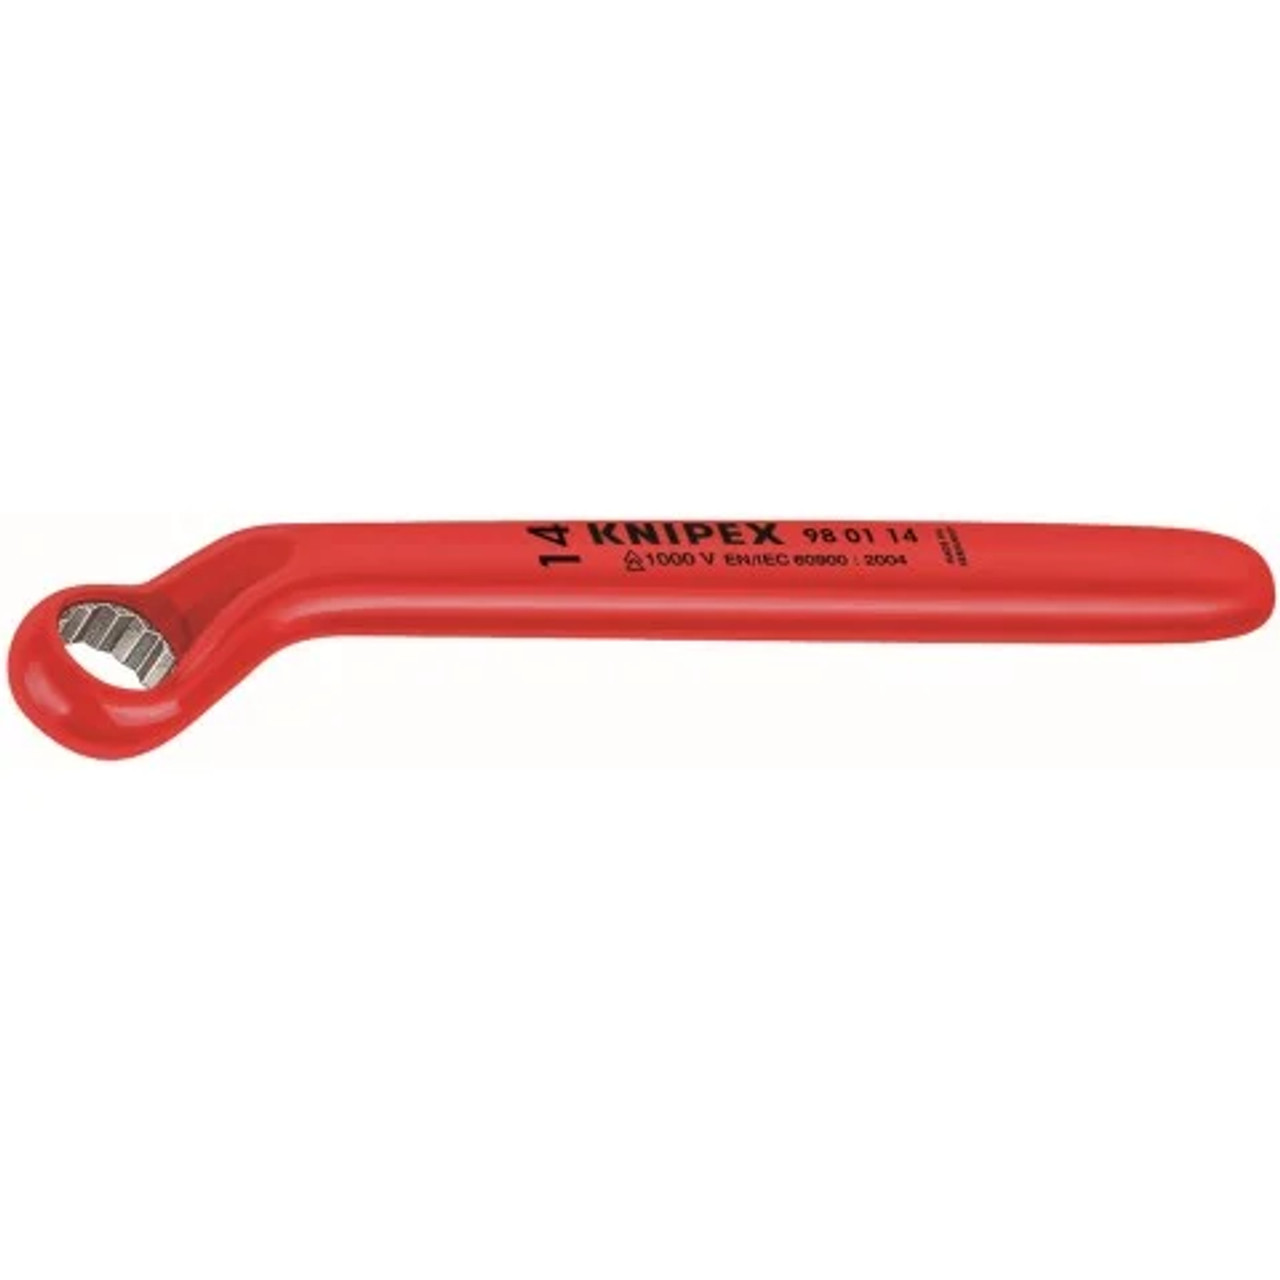 Knipex 9k 00 80 147 US 2 PC 10 Cobra Water Pump and Pliers Wrench Set